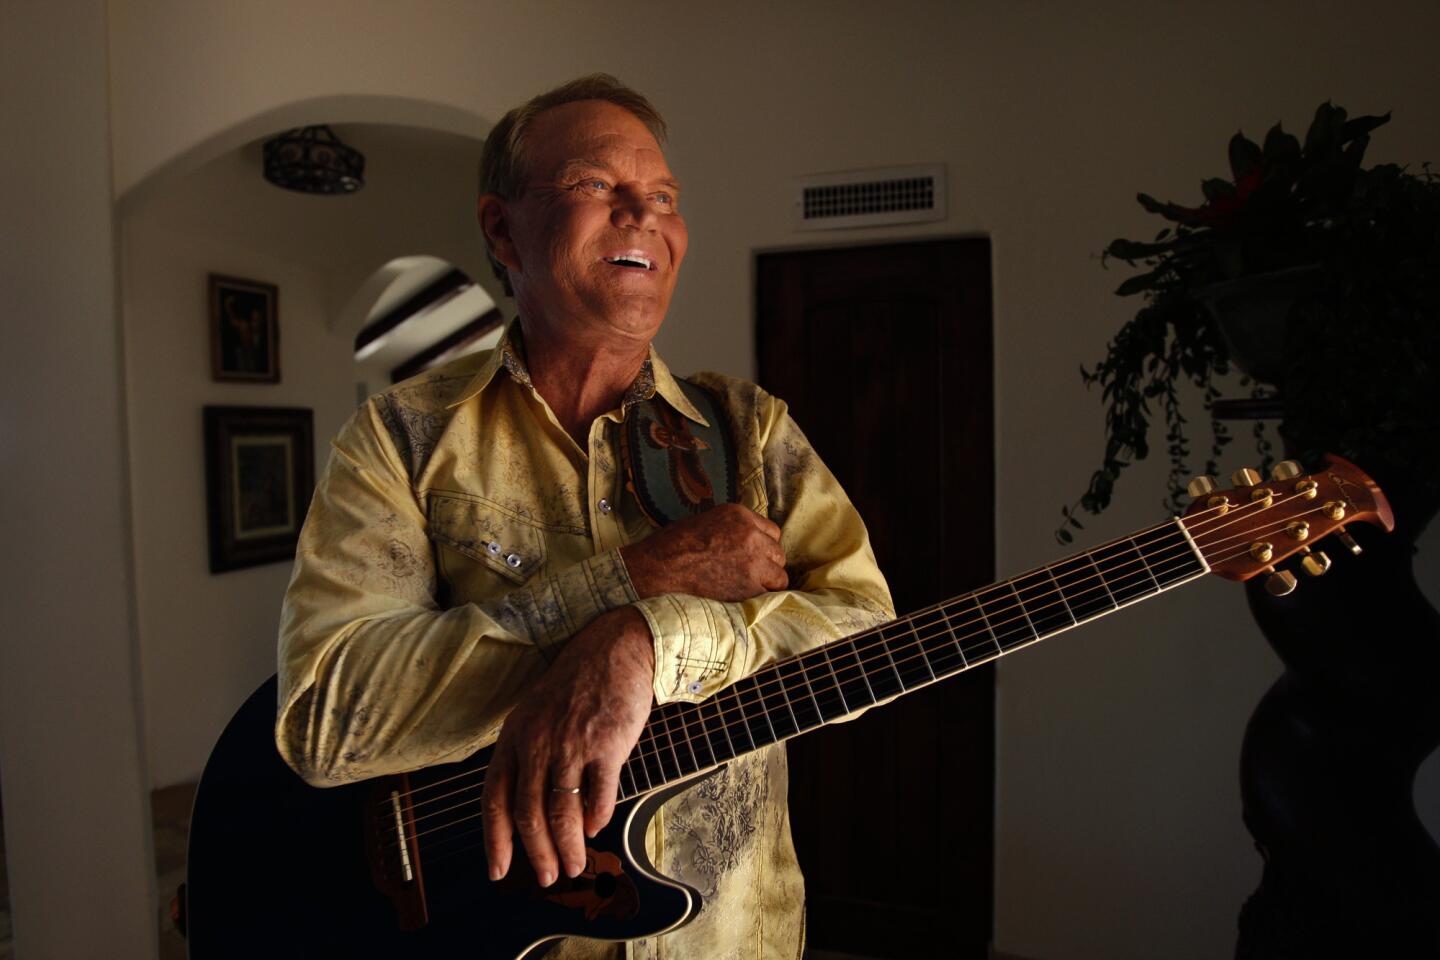 Glen Campbell's career stretches over five decades, from his early years as a session guitarist in Los Angeles when he played on recordings by Phil Spector, the Beach Boys, Frank Sinatra, Elvis Presley and many others, to his success as a solo artist with such hits as "Gentle on My Mind," "By the Time I Get to Phoenix," "Galveston" and "Rhinestone Cowboy."